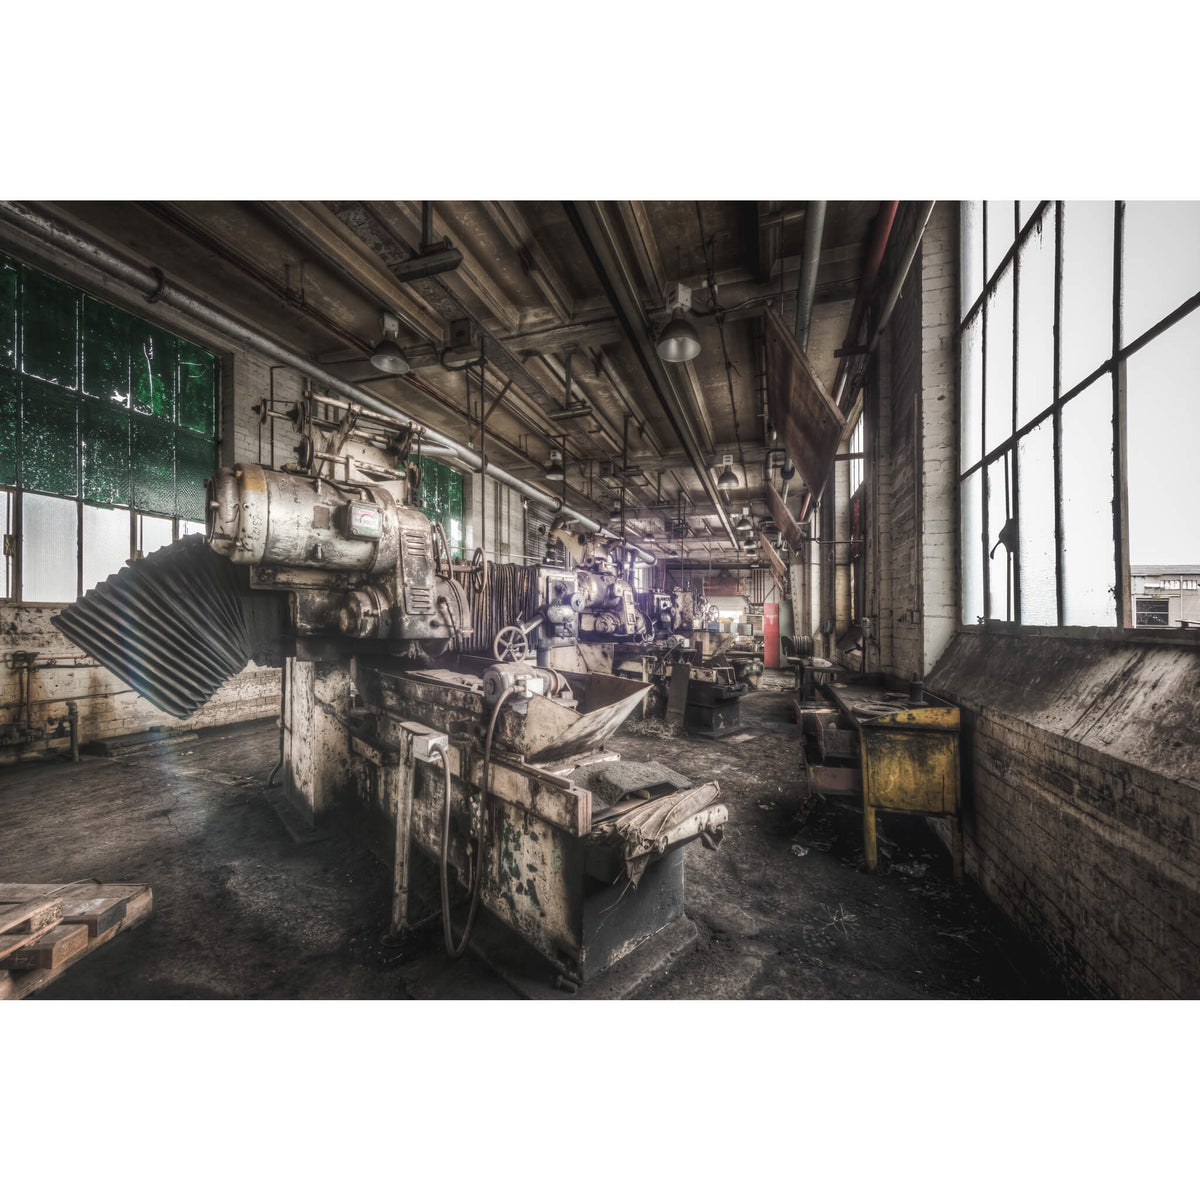 Grinding Shop | Morwell Power Station